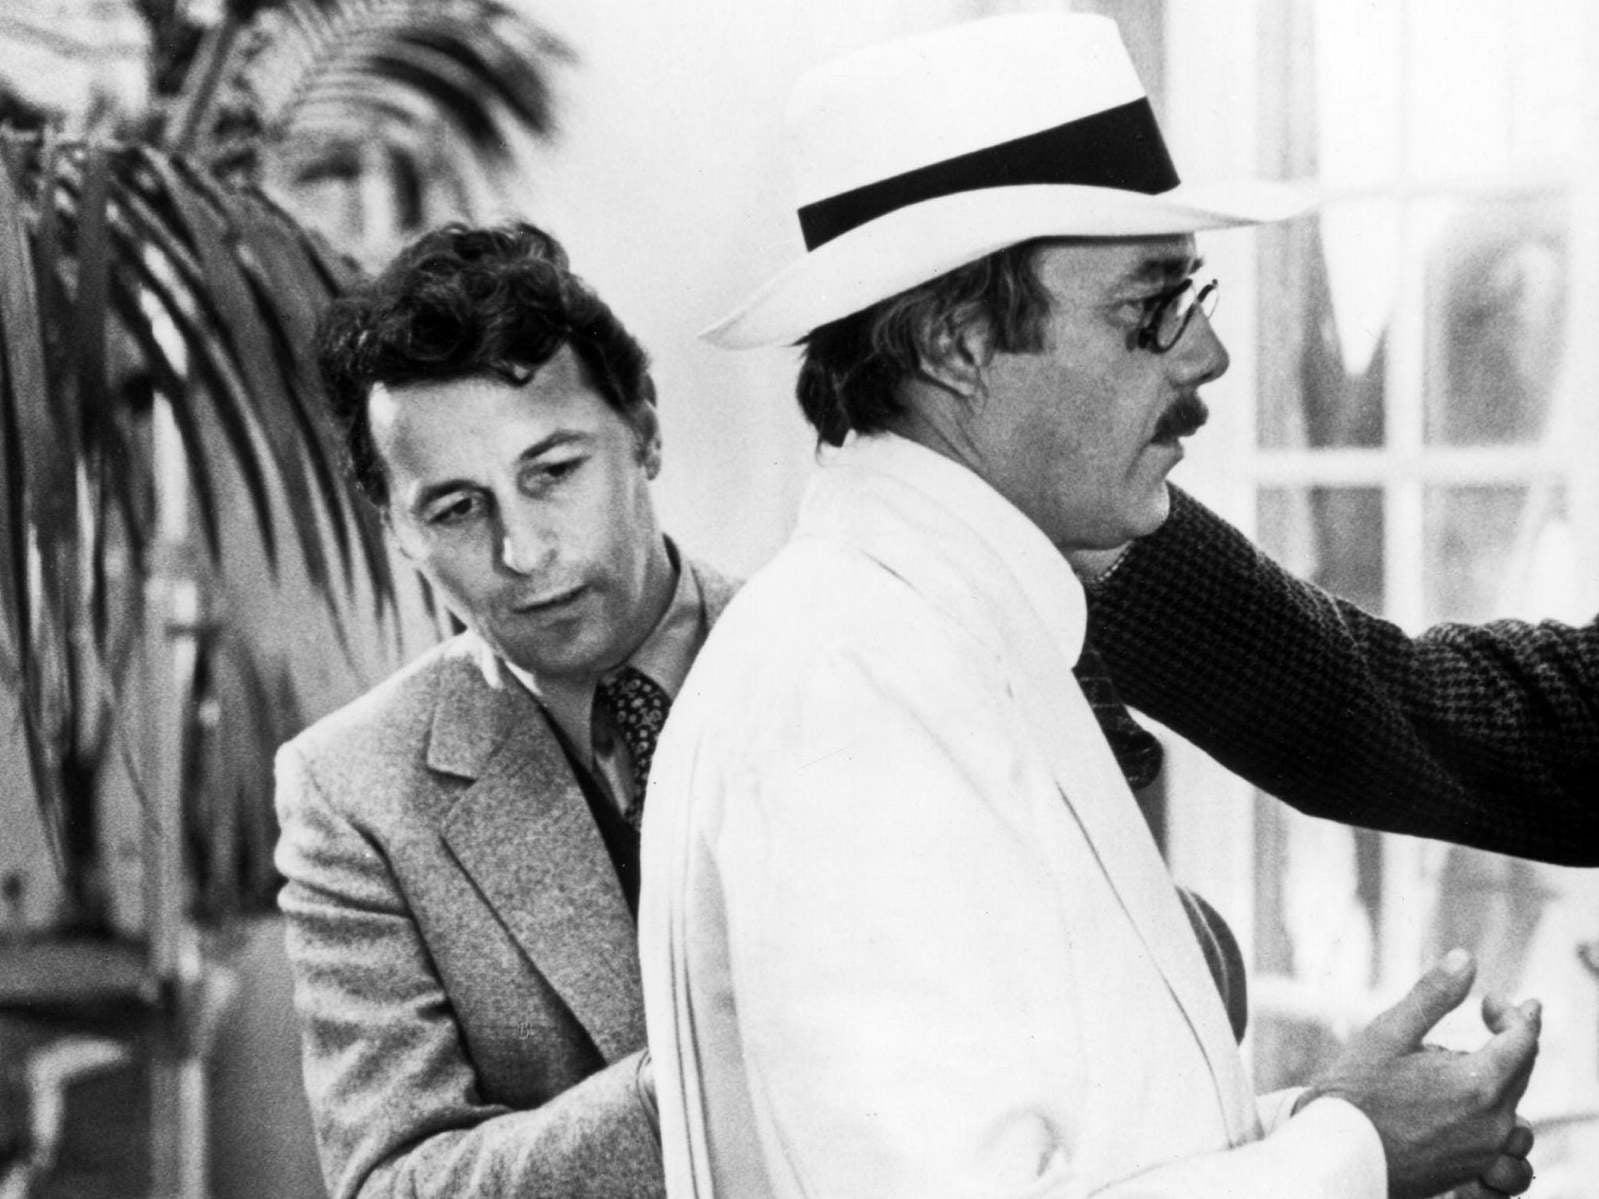 Tosi (left) with Dirk Bogarde on the set of Luchino Visconti’s ‘Death in Venice’, 1971